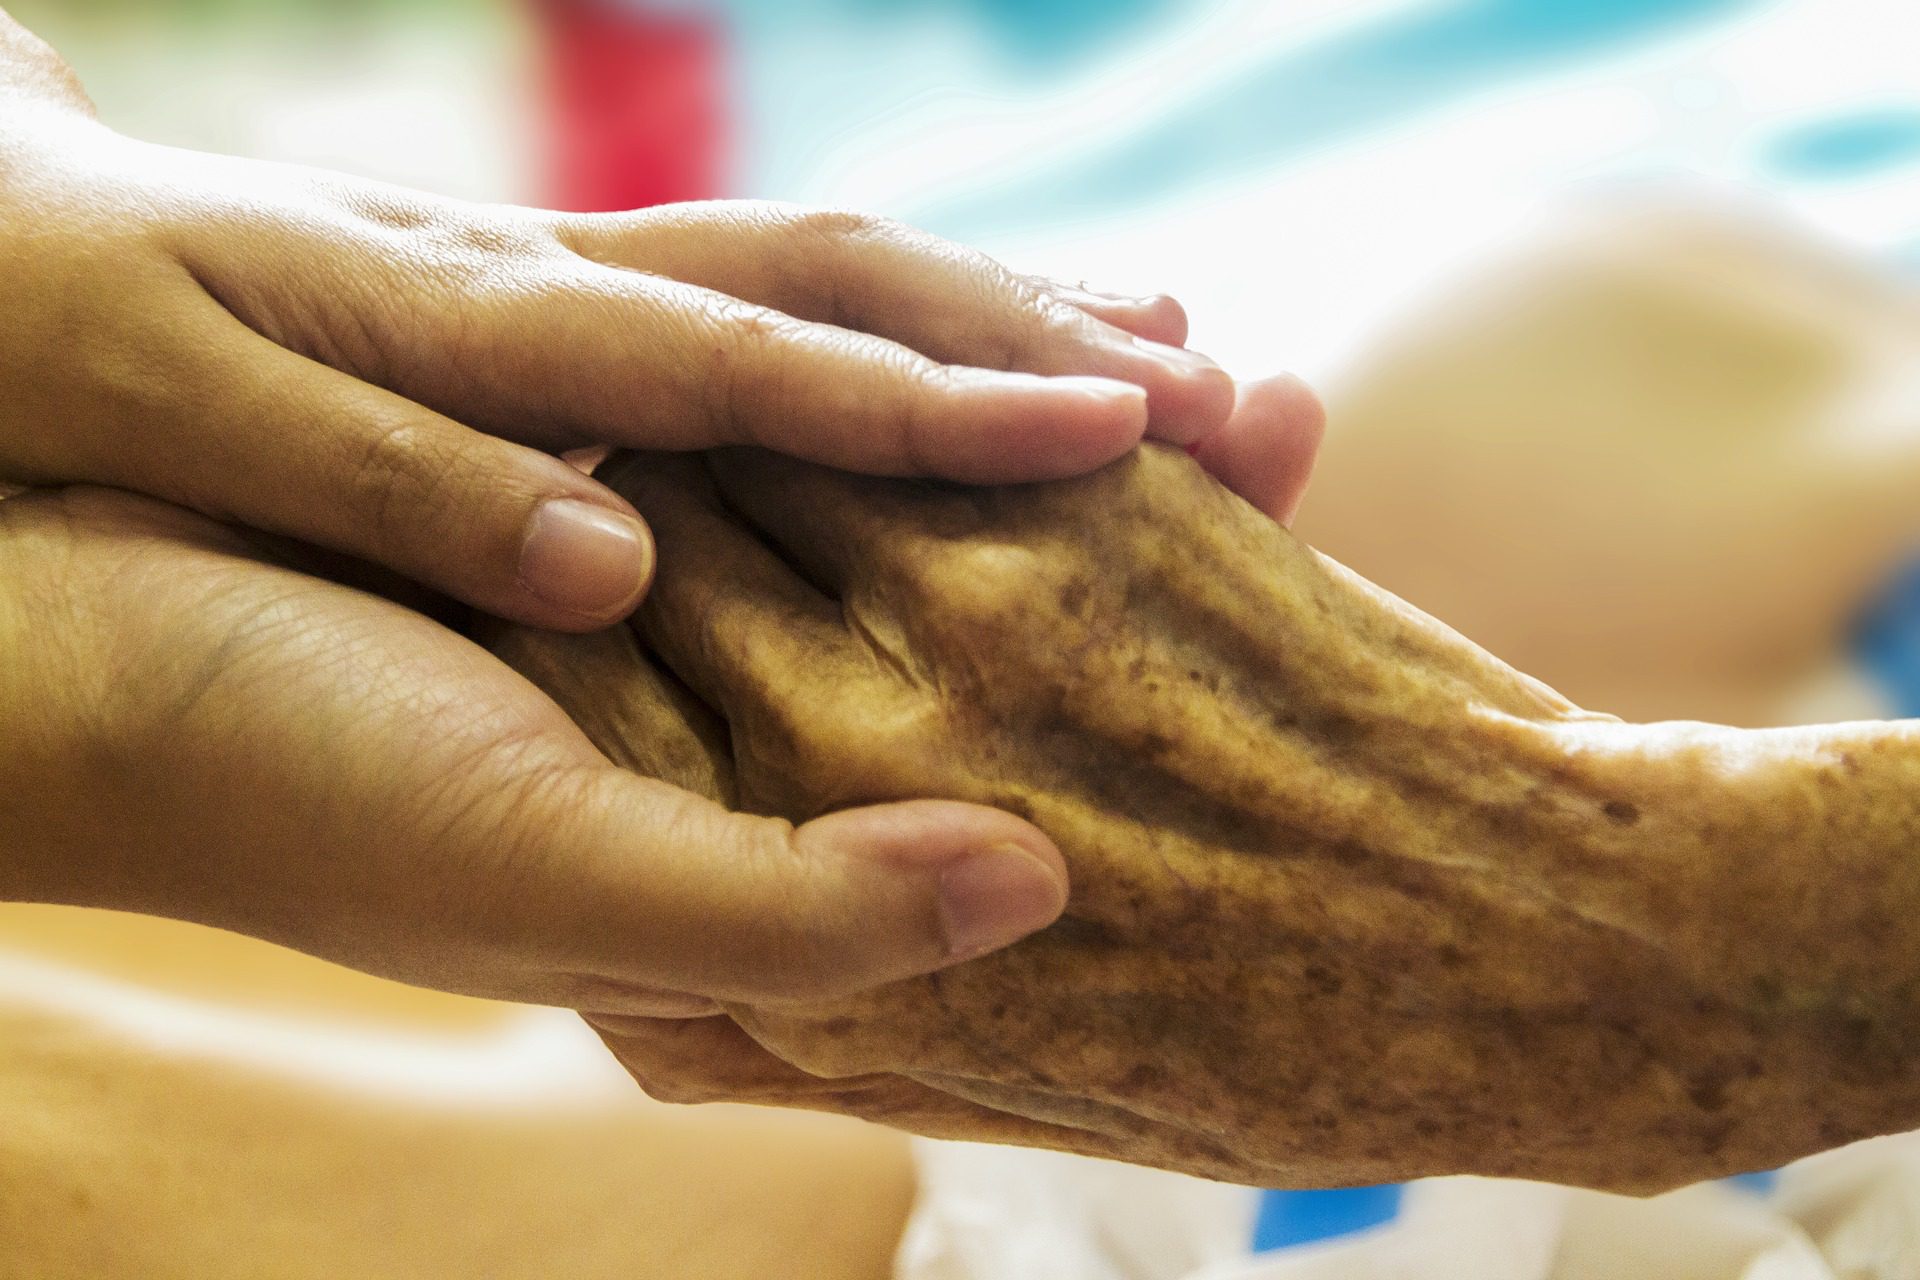 The vital role of caring for people in their final days